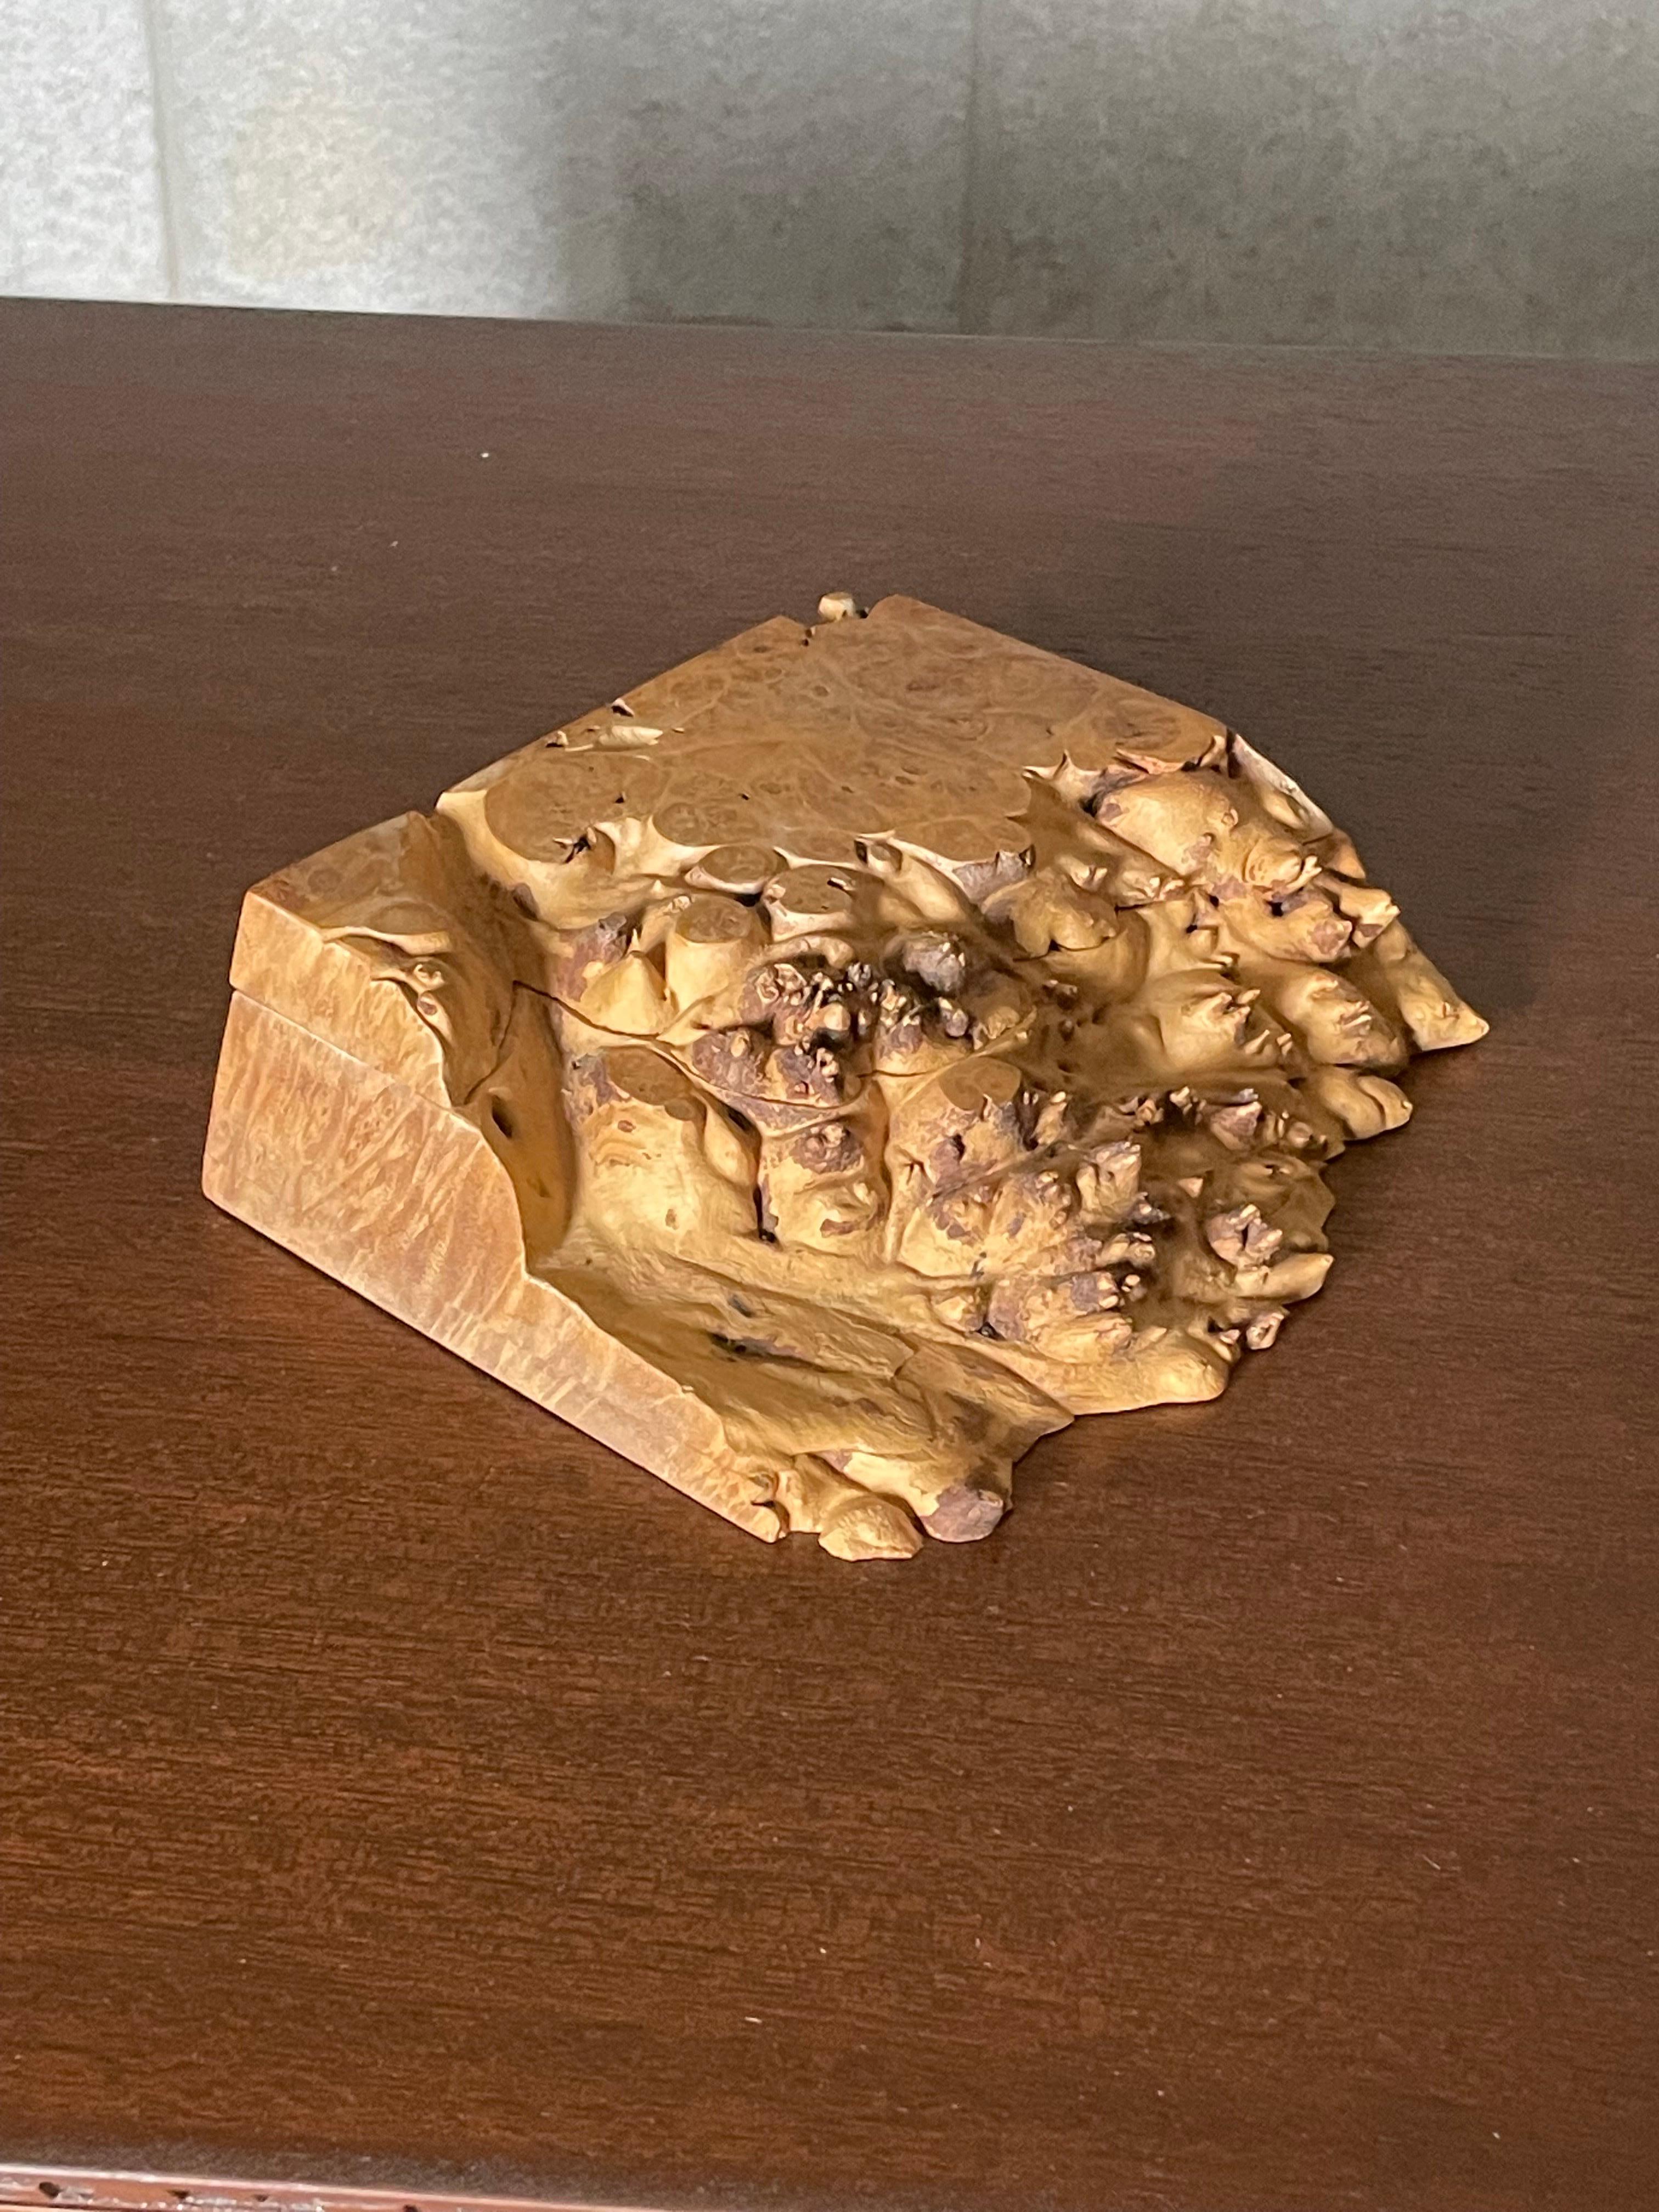 A wonderful lidded box made by Michael Elkan from Oregon Birdseye Maple Burl. Box features a live edge front with great movement. Lid is not hinged like many of his other boxes and is completely removable. Box is signed on underside and comes